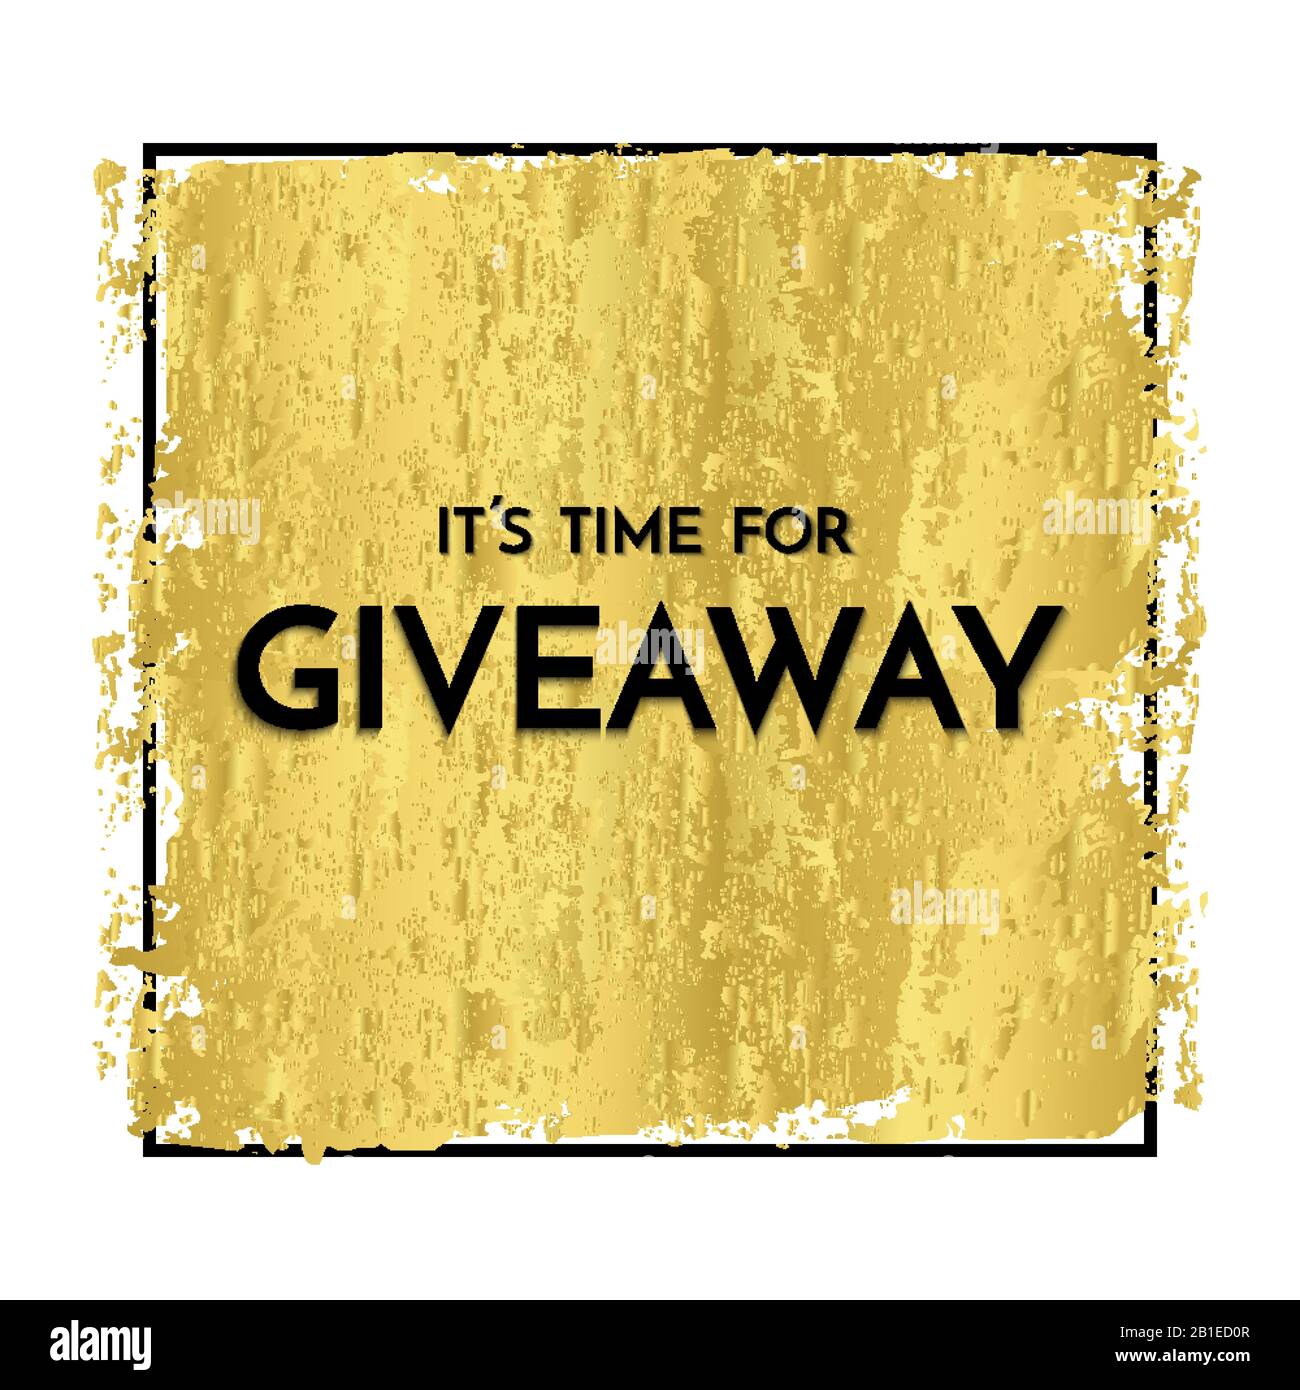 Time for giveaway - banner template. Time for Giveaway phrase on gold background. Stock Vector